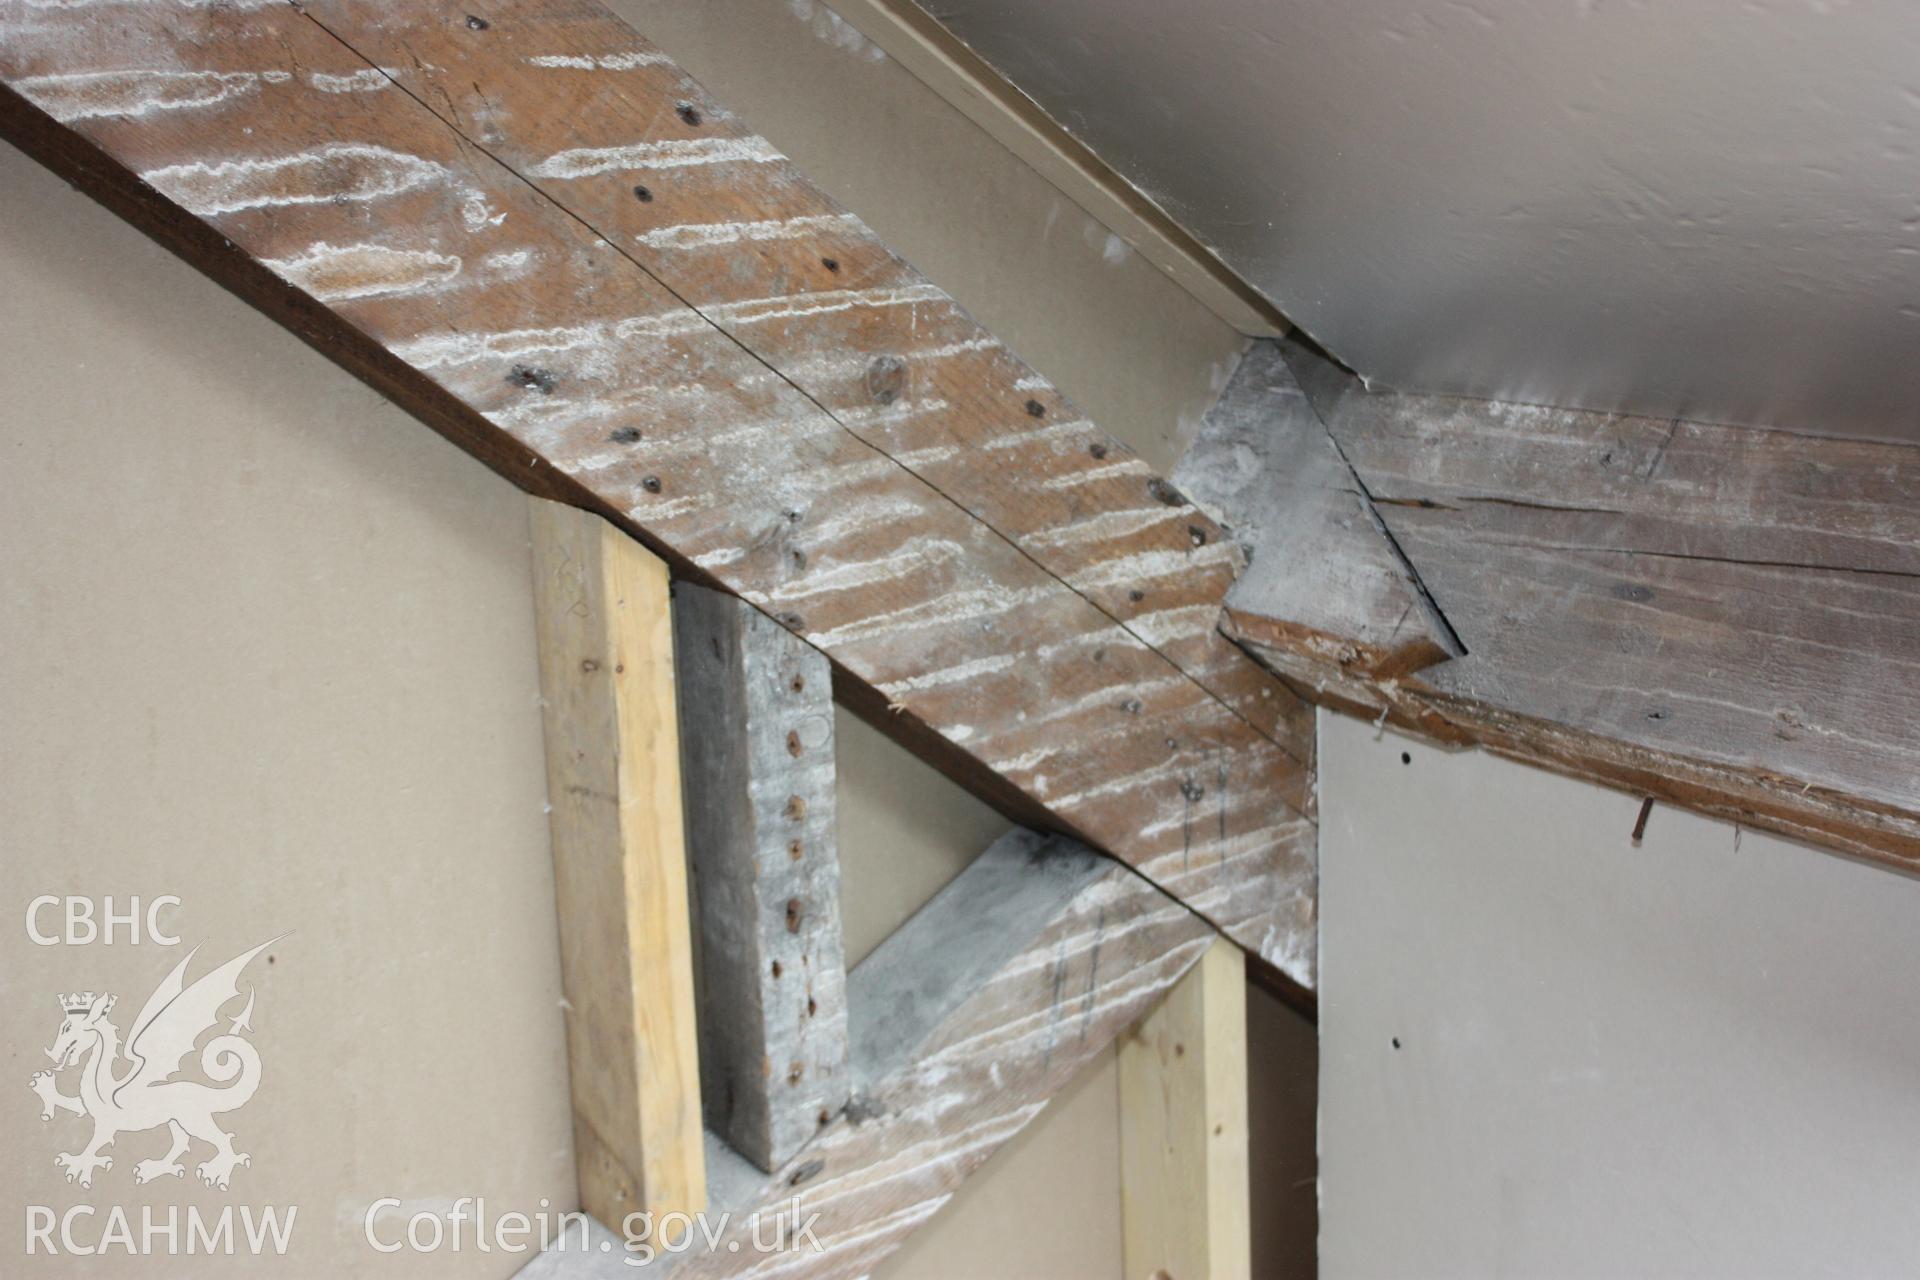 Colour photograph showing detail of the Queen strut truss at the attic level of the Old Auction Rooms/ Liberal Club in Aberystwyth. Photographic survey conducted by Geoff Ward on 9th June 2010 during repair work prior to conversion into flats.